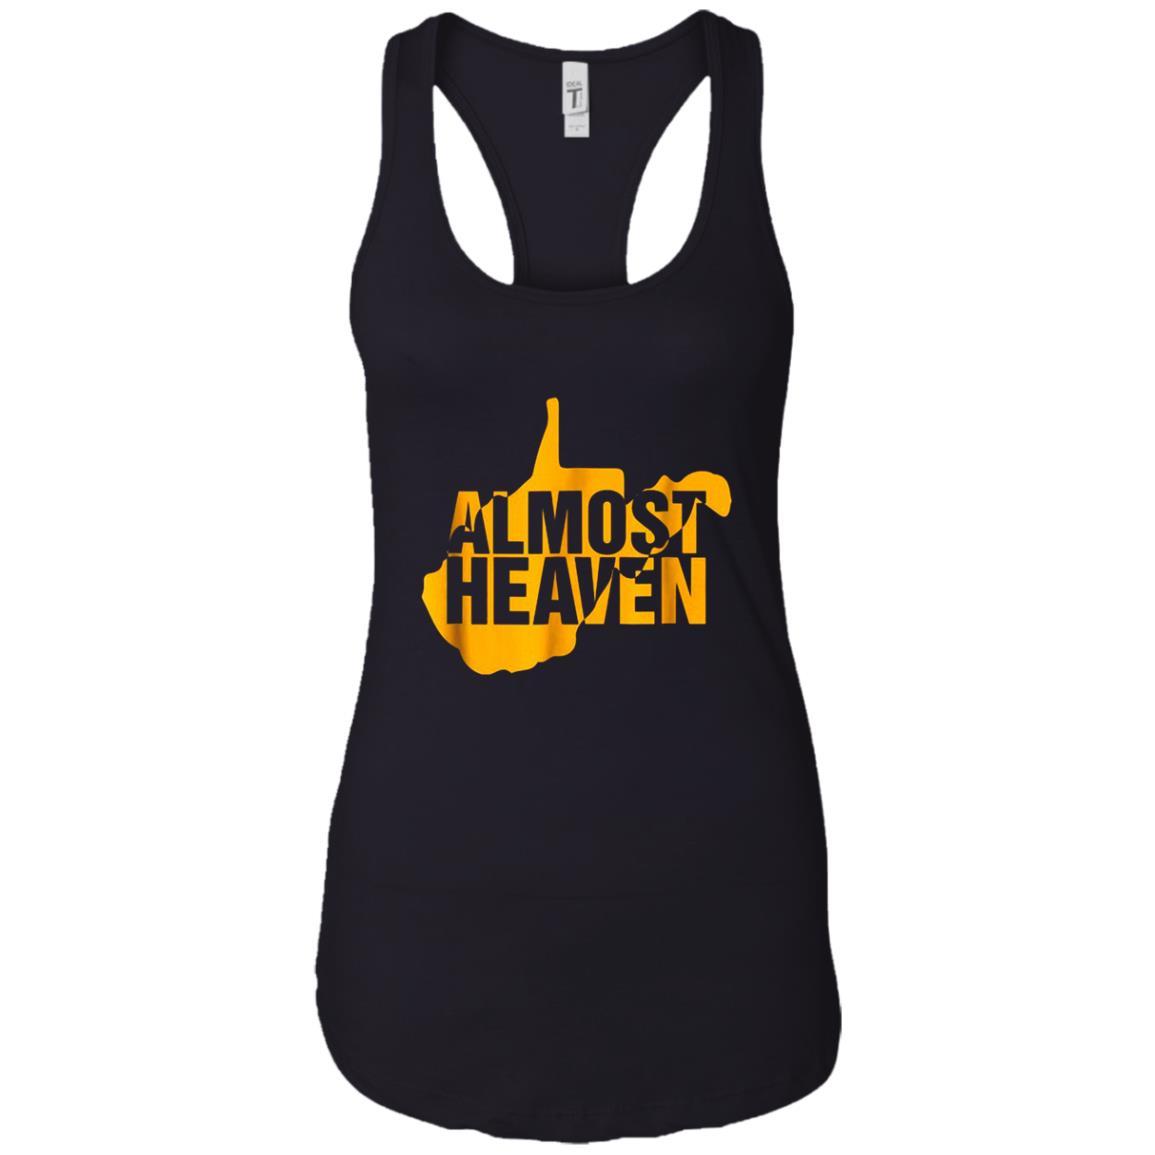 Almost Heaven West Virginia Shirts